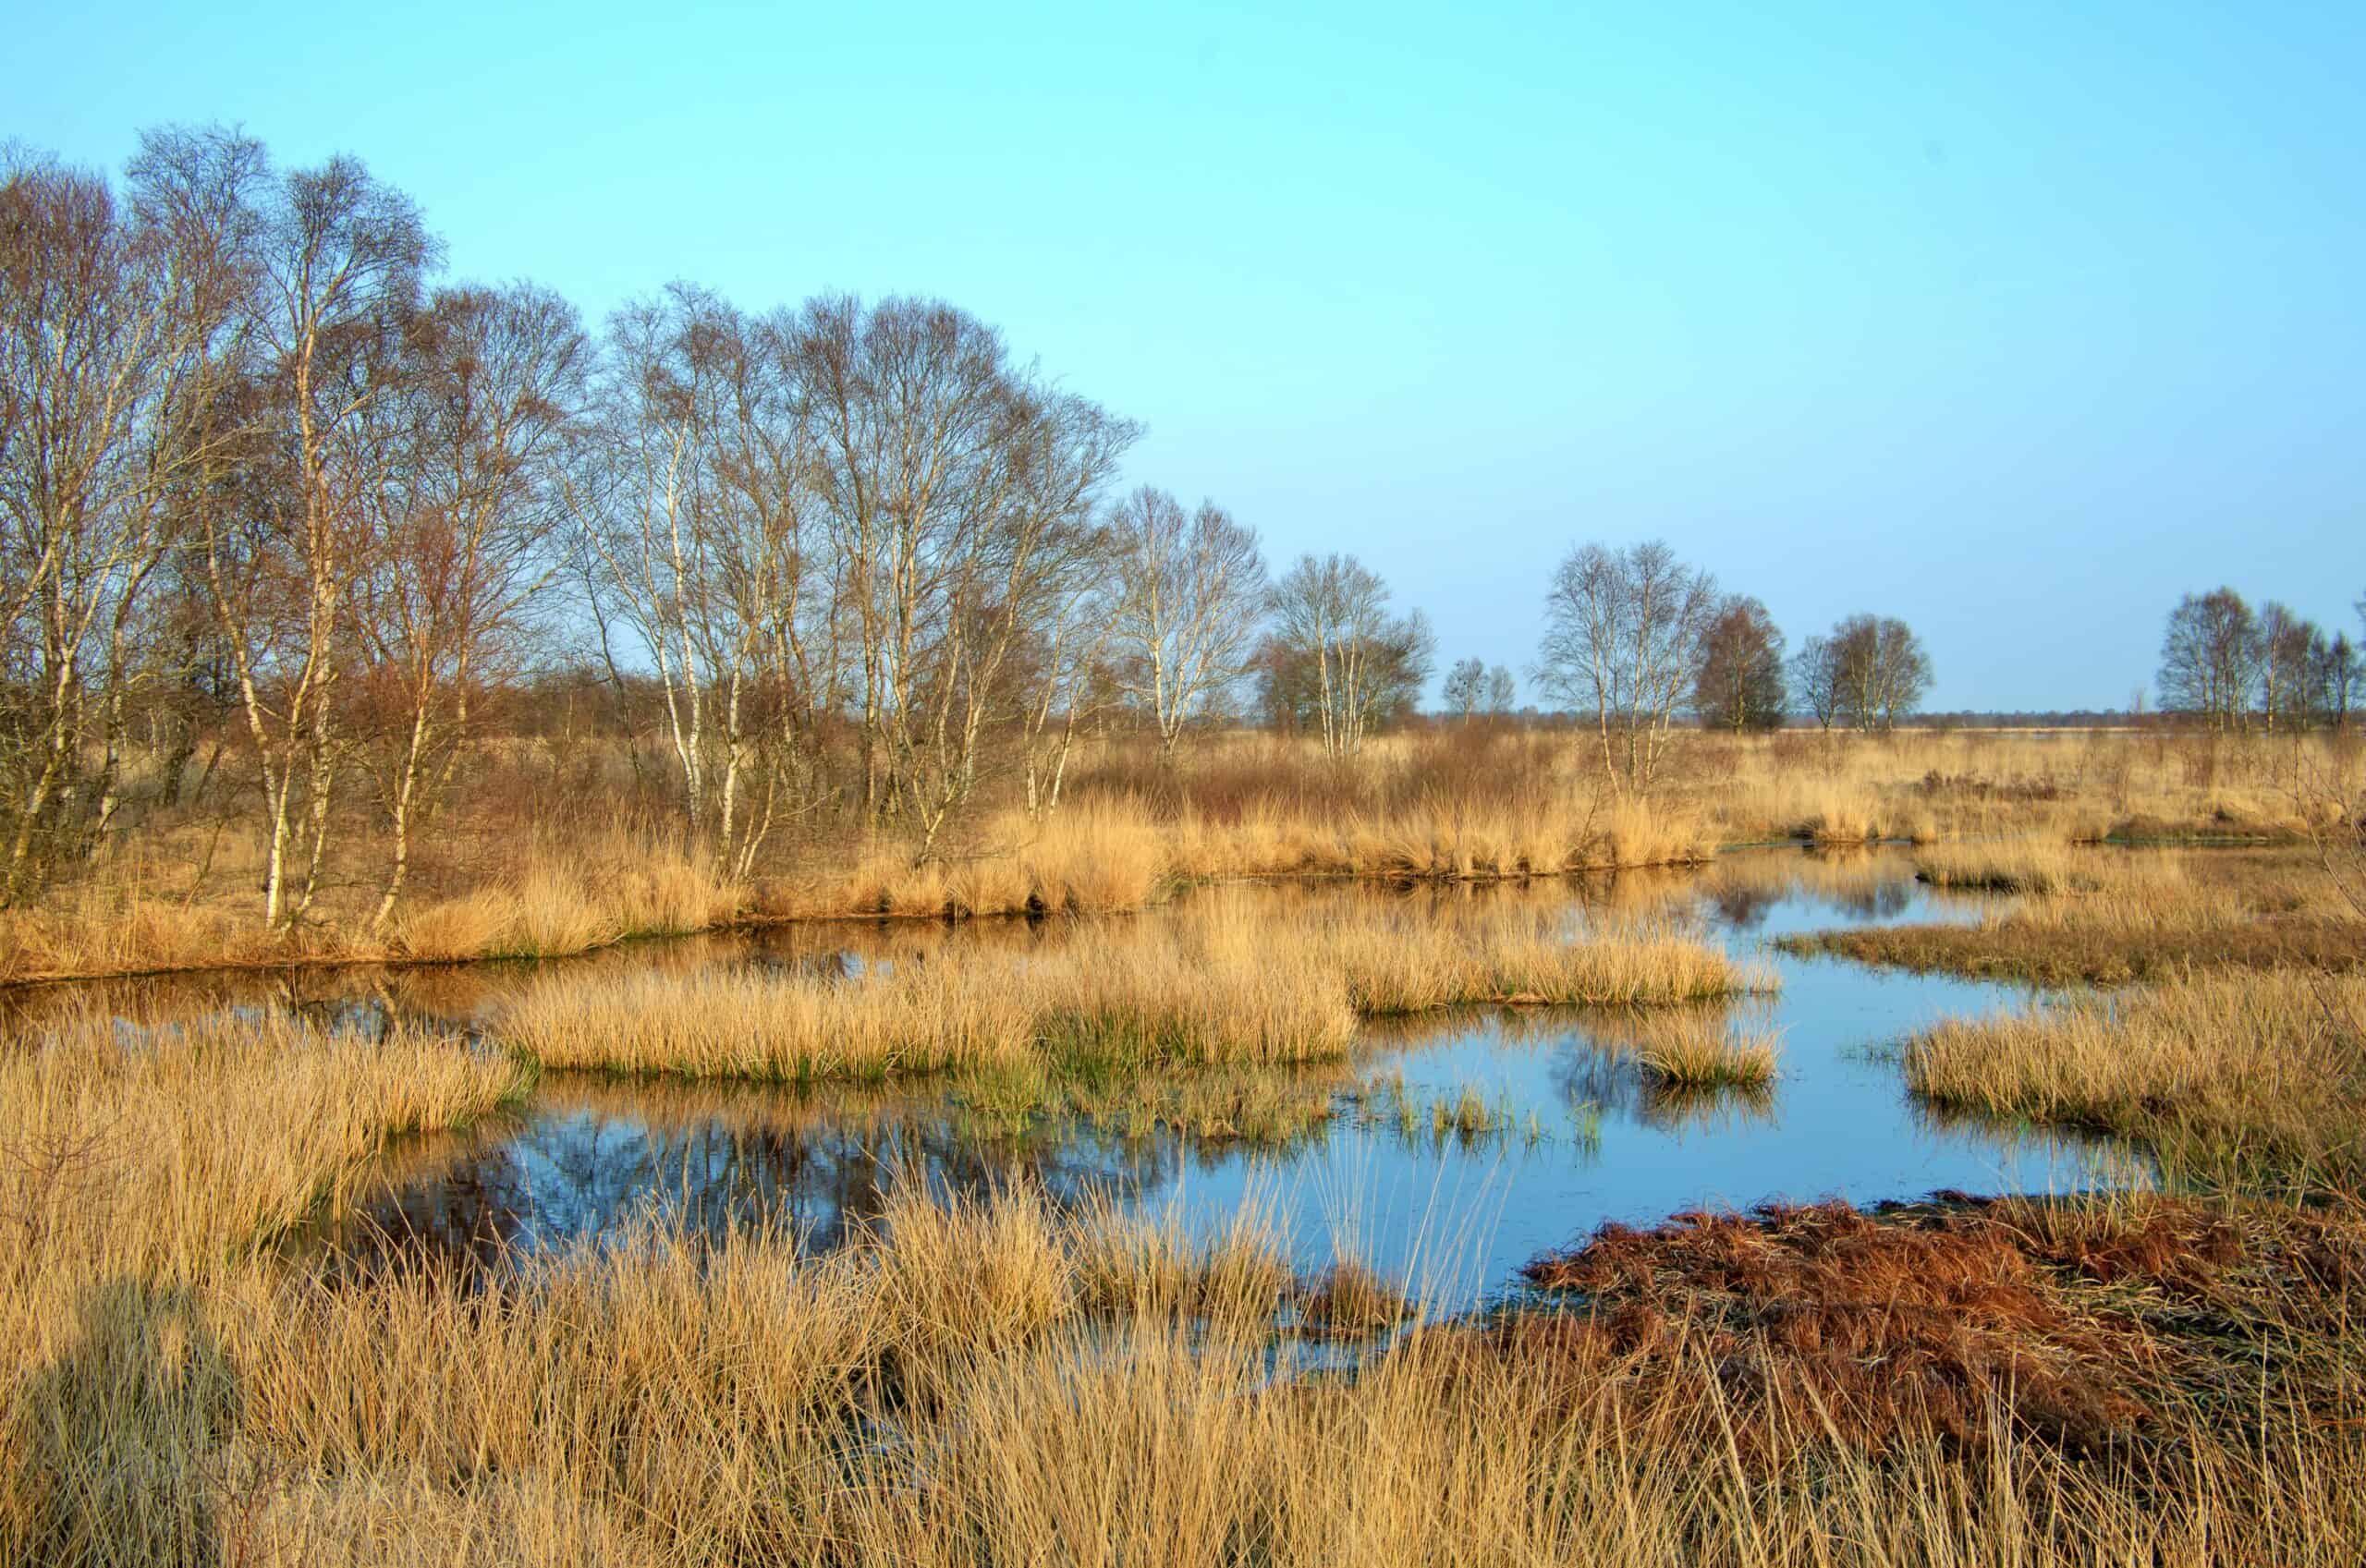 Landscape photo of the Ewiges Meer, a peat bog in Germany.